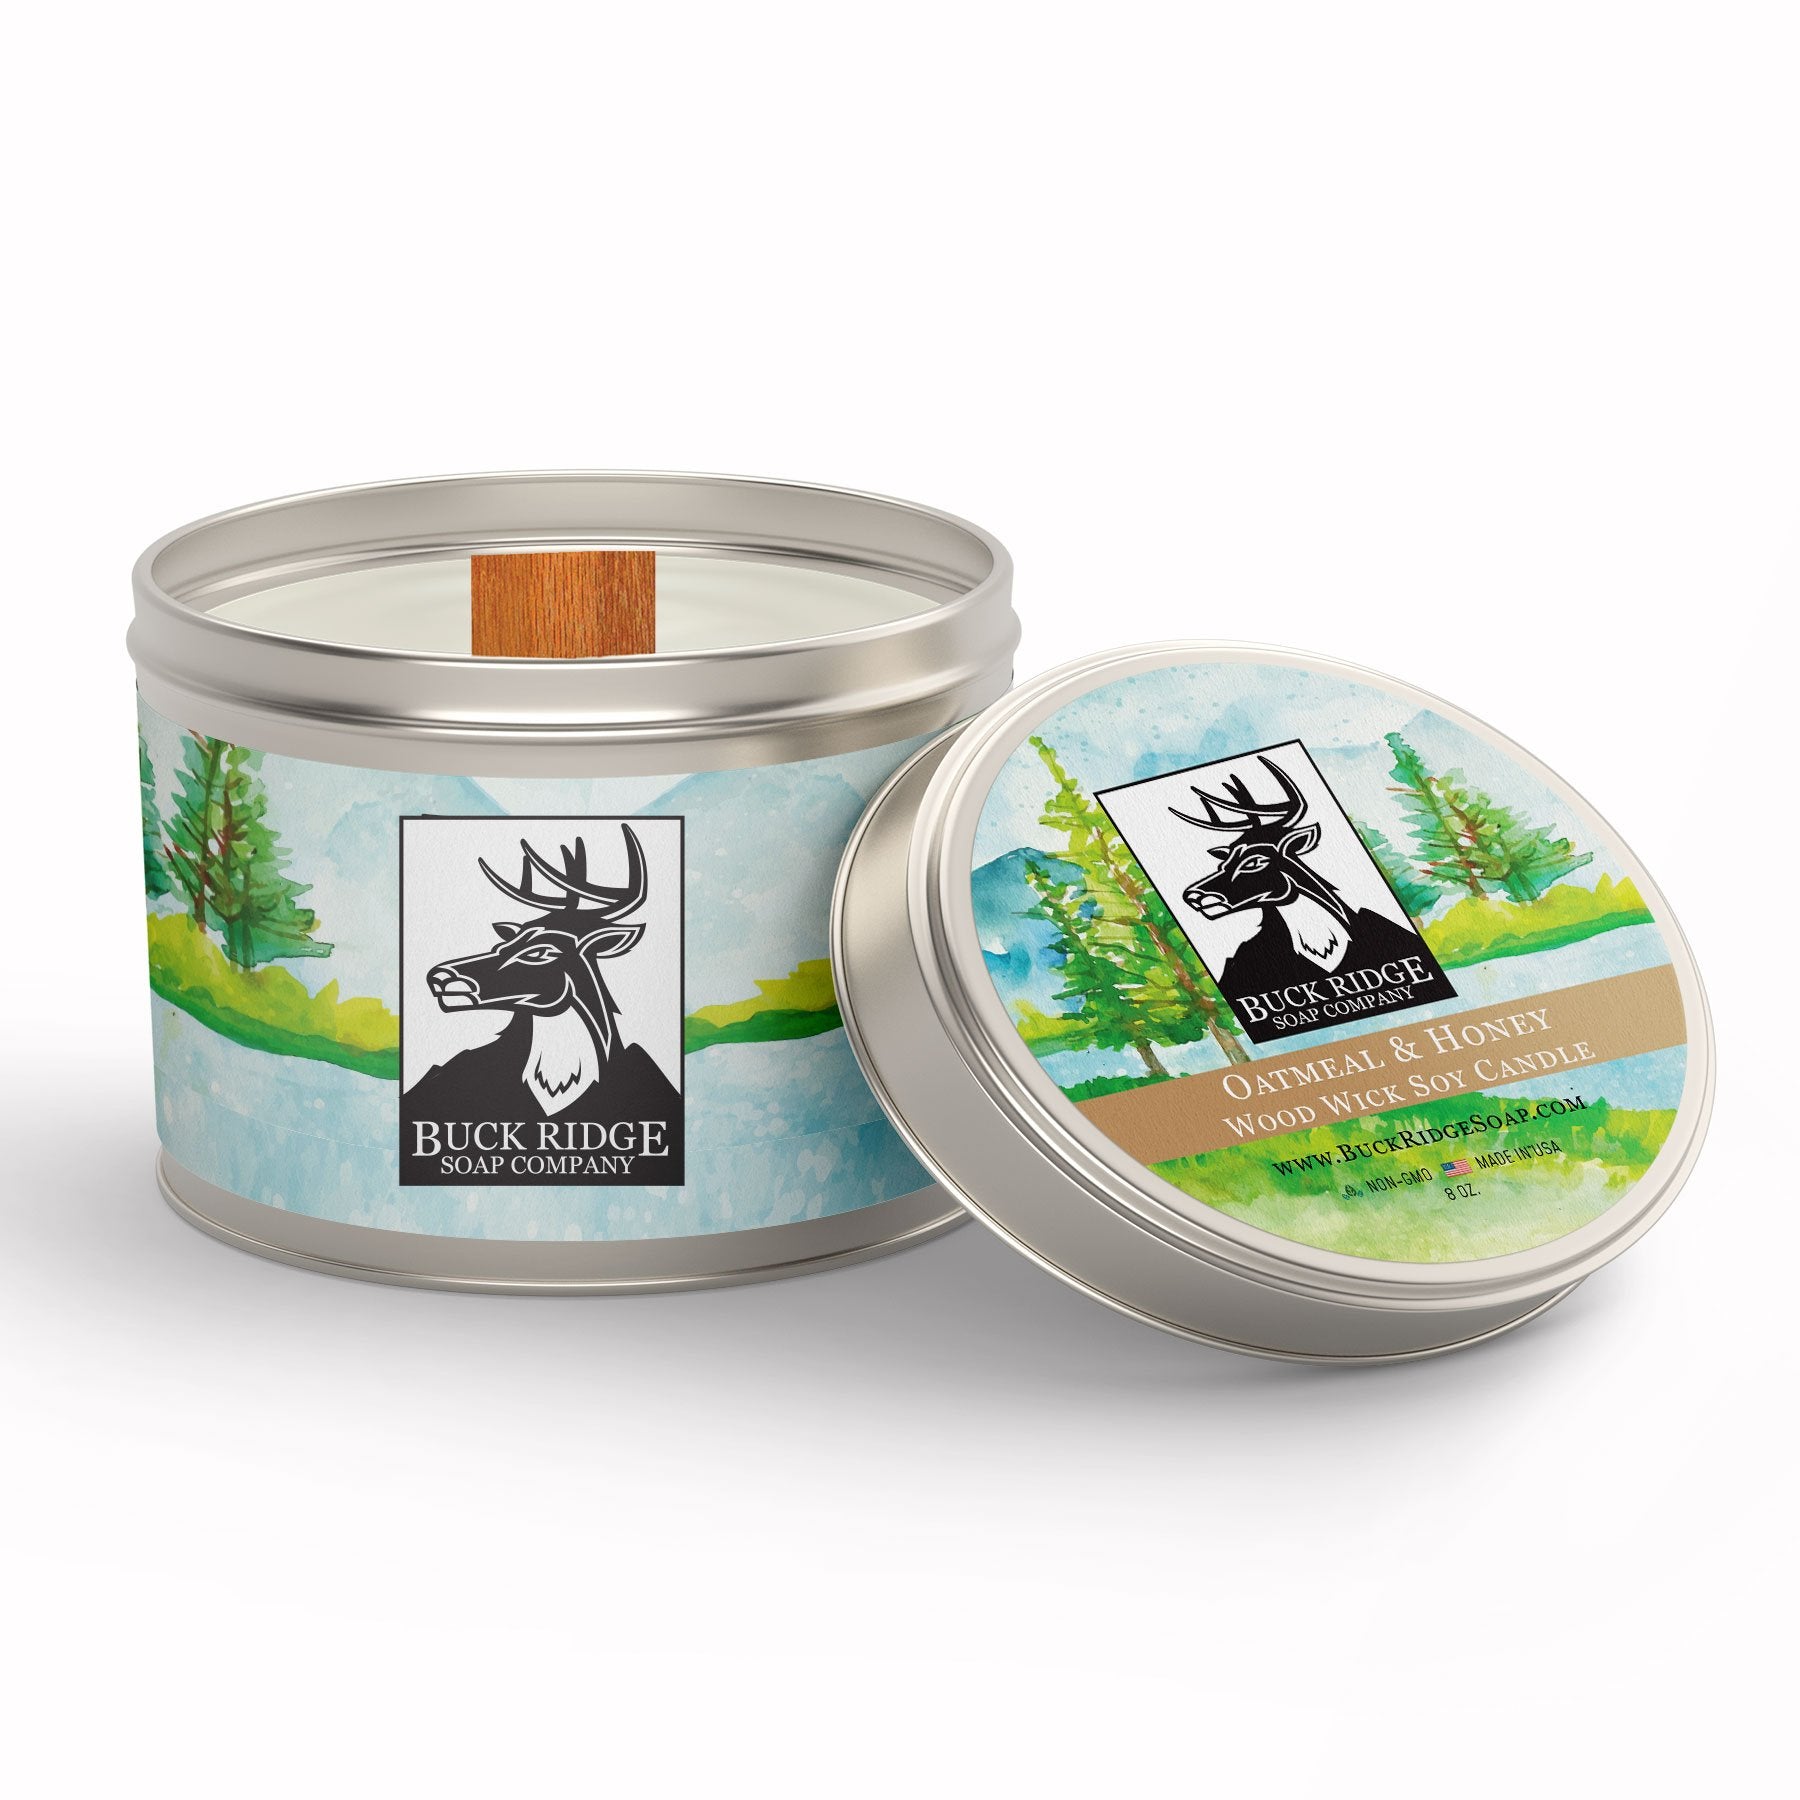 Oatmeal and Honey Sustainable Wood Wick Soy Candle Buck Ridge Soap